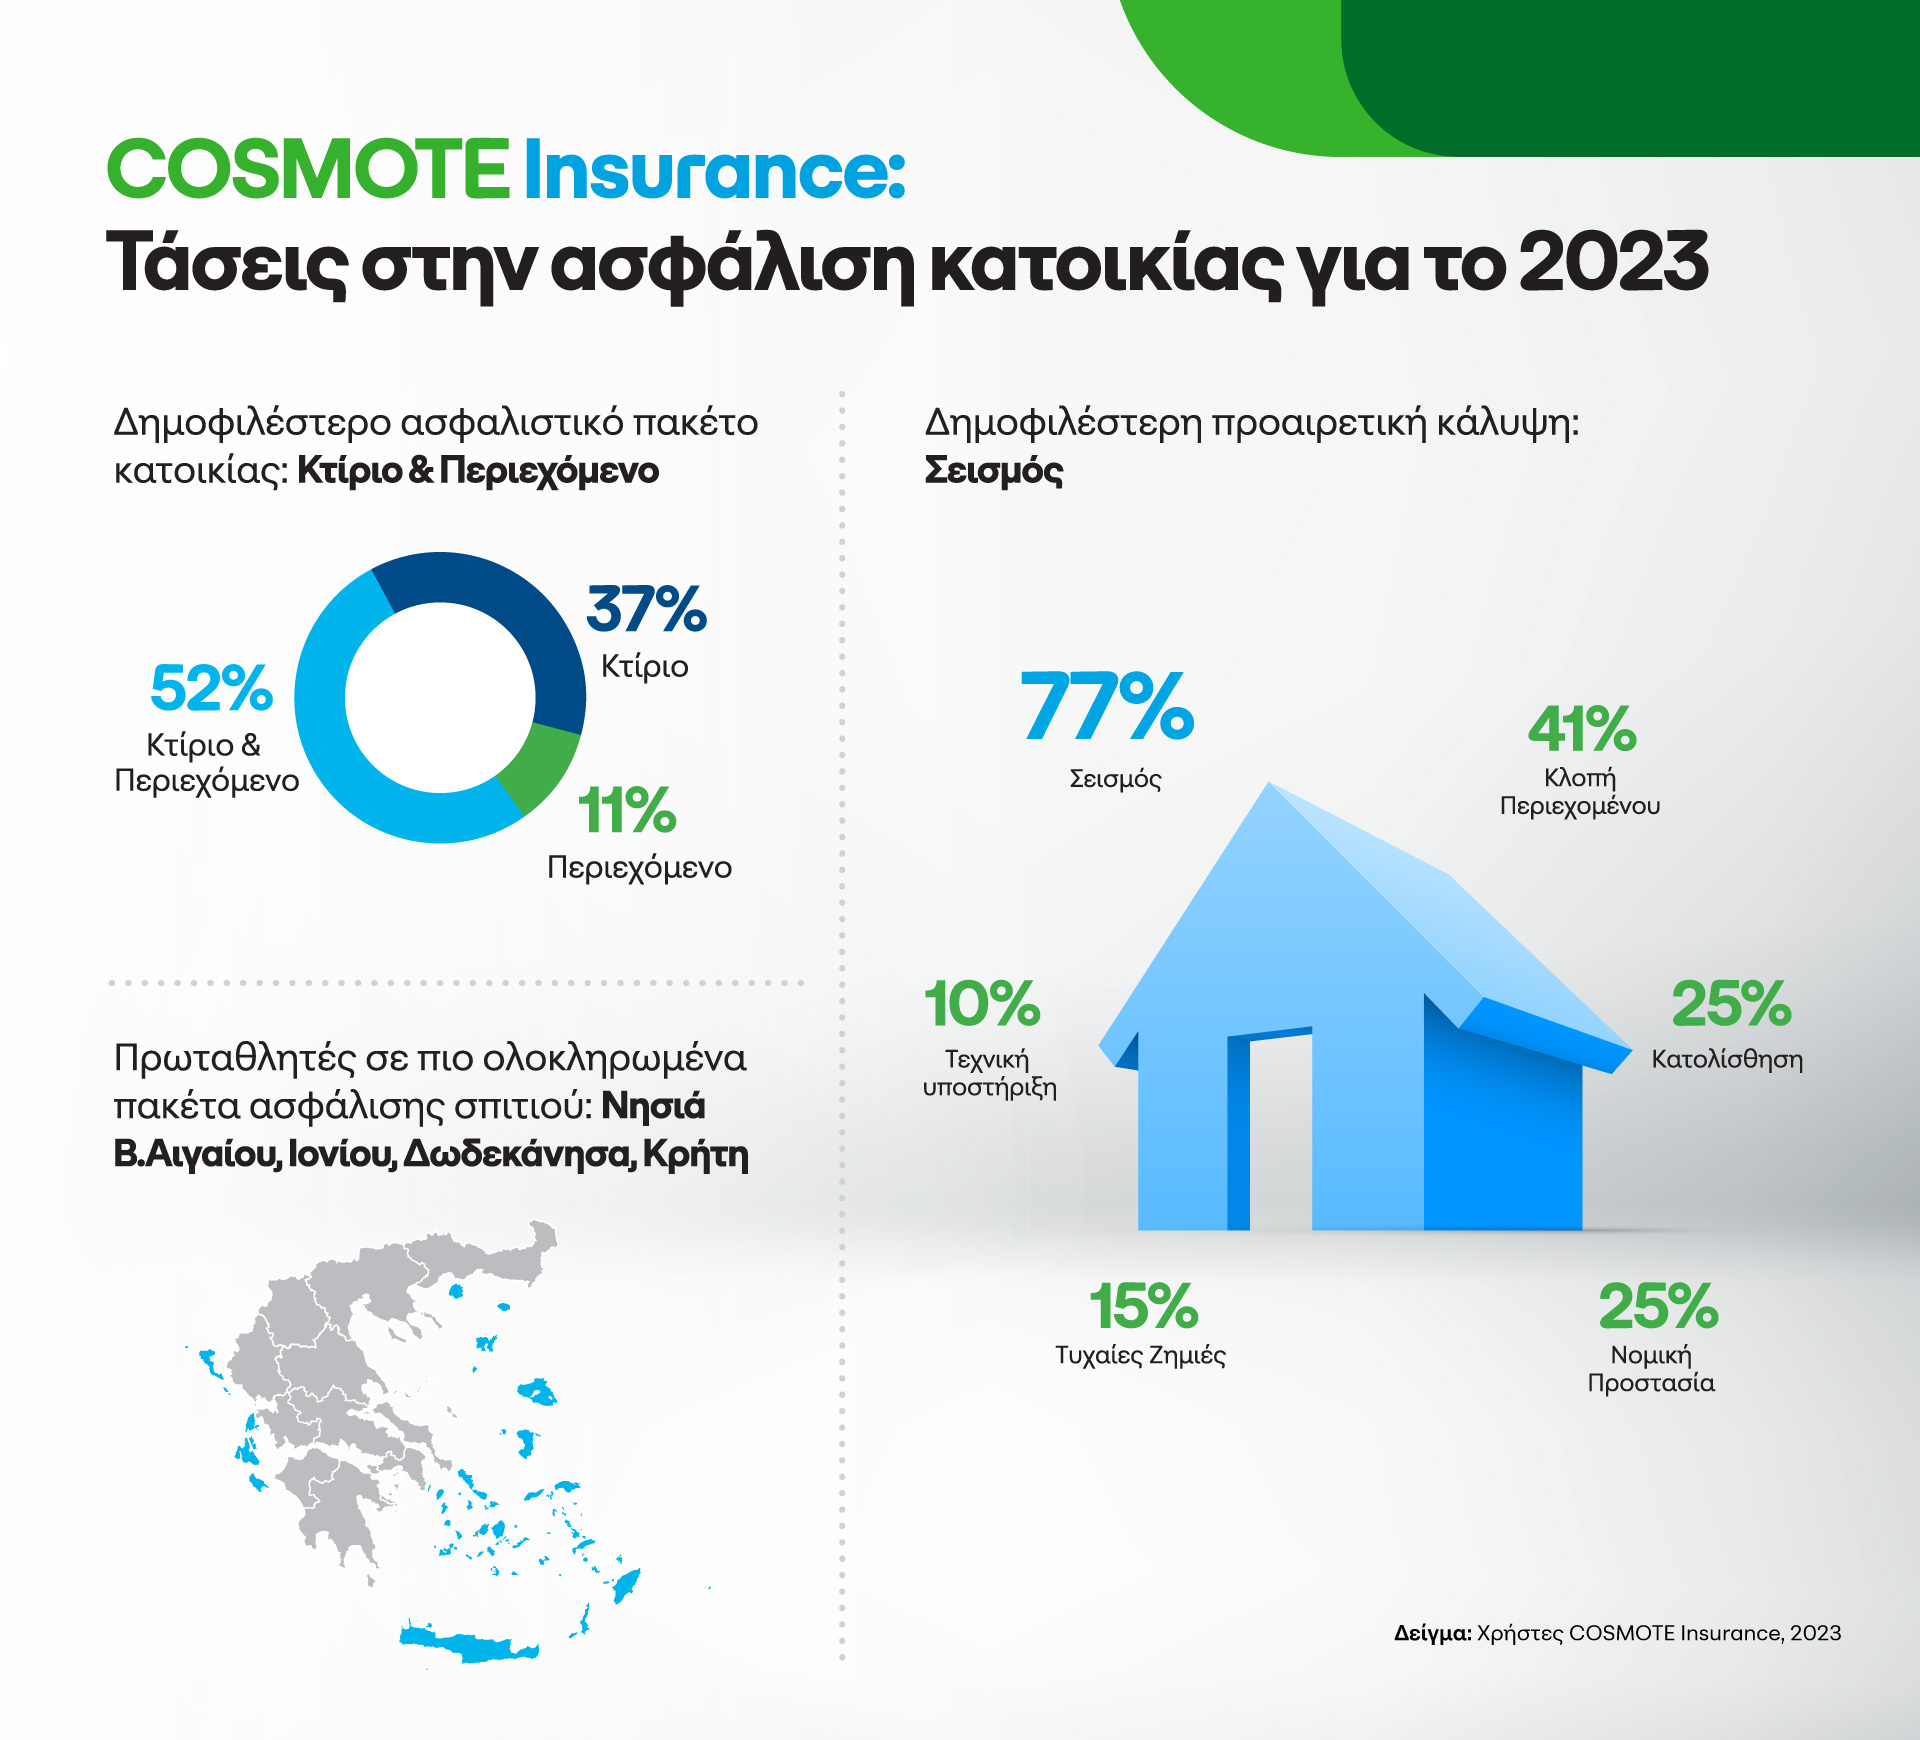 COSMOTEInsurance Survey infographic